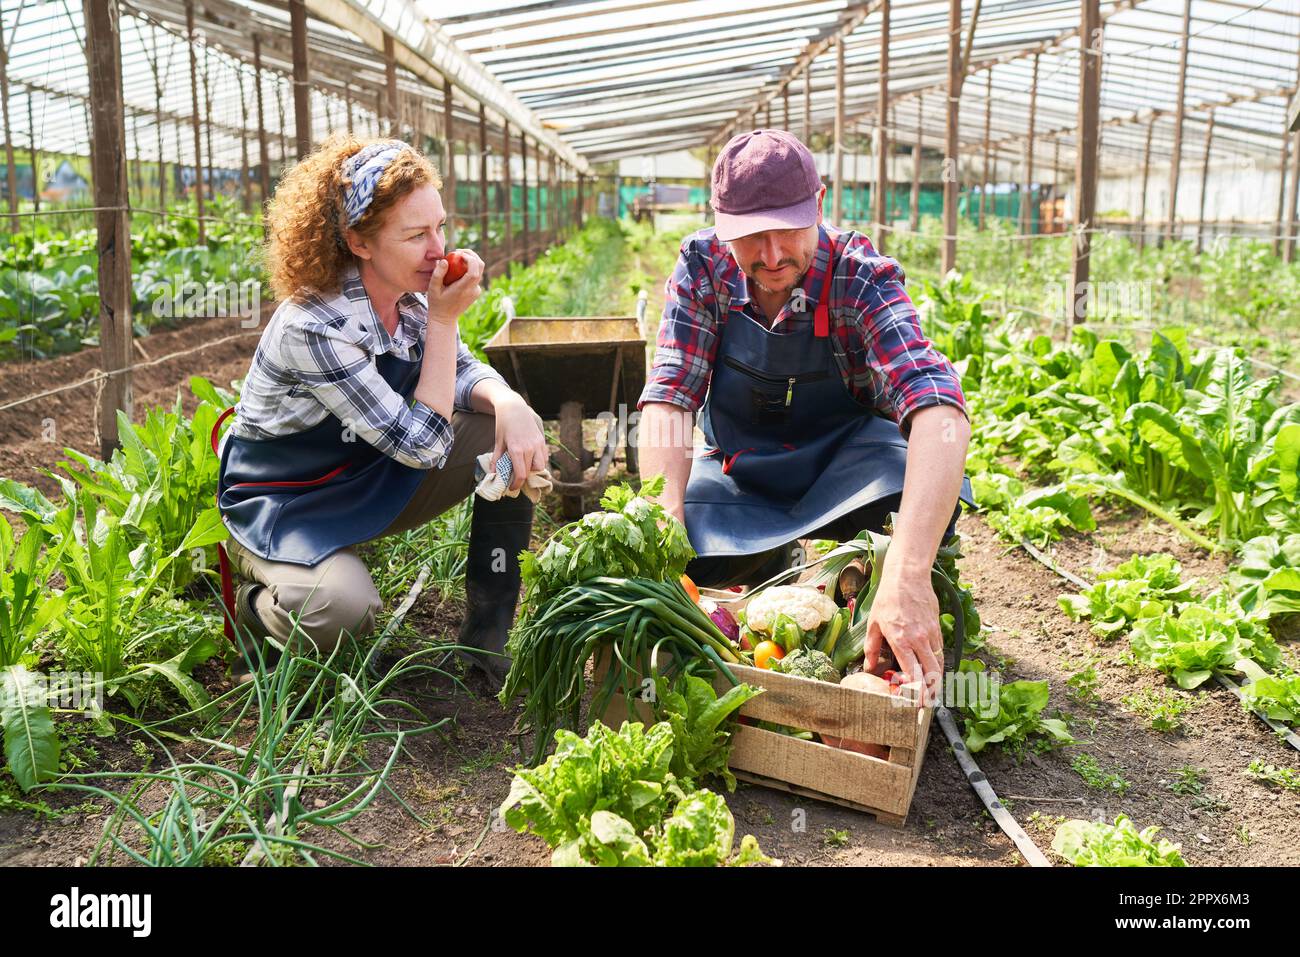 Female farmer smelling fresh vegetable while harvesting with colleague in organic farm Stock Photo